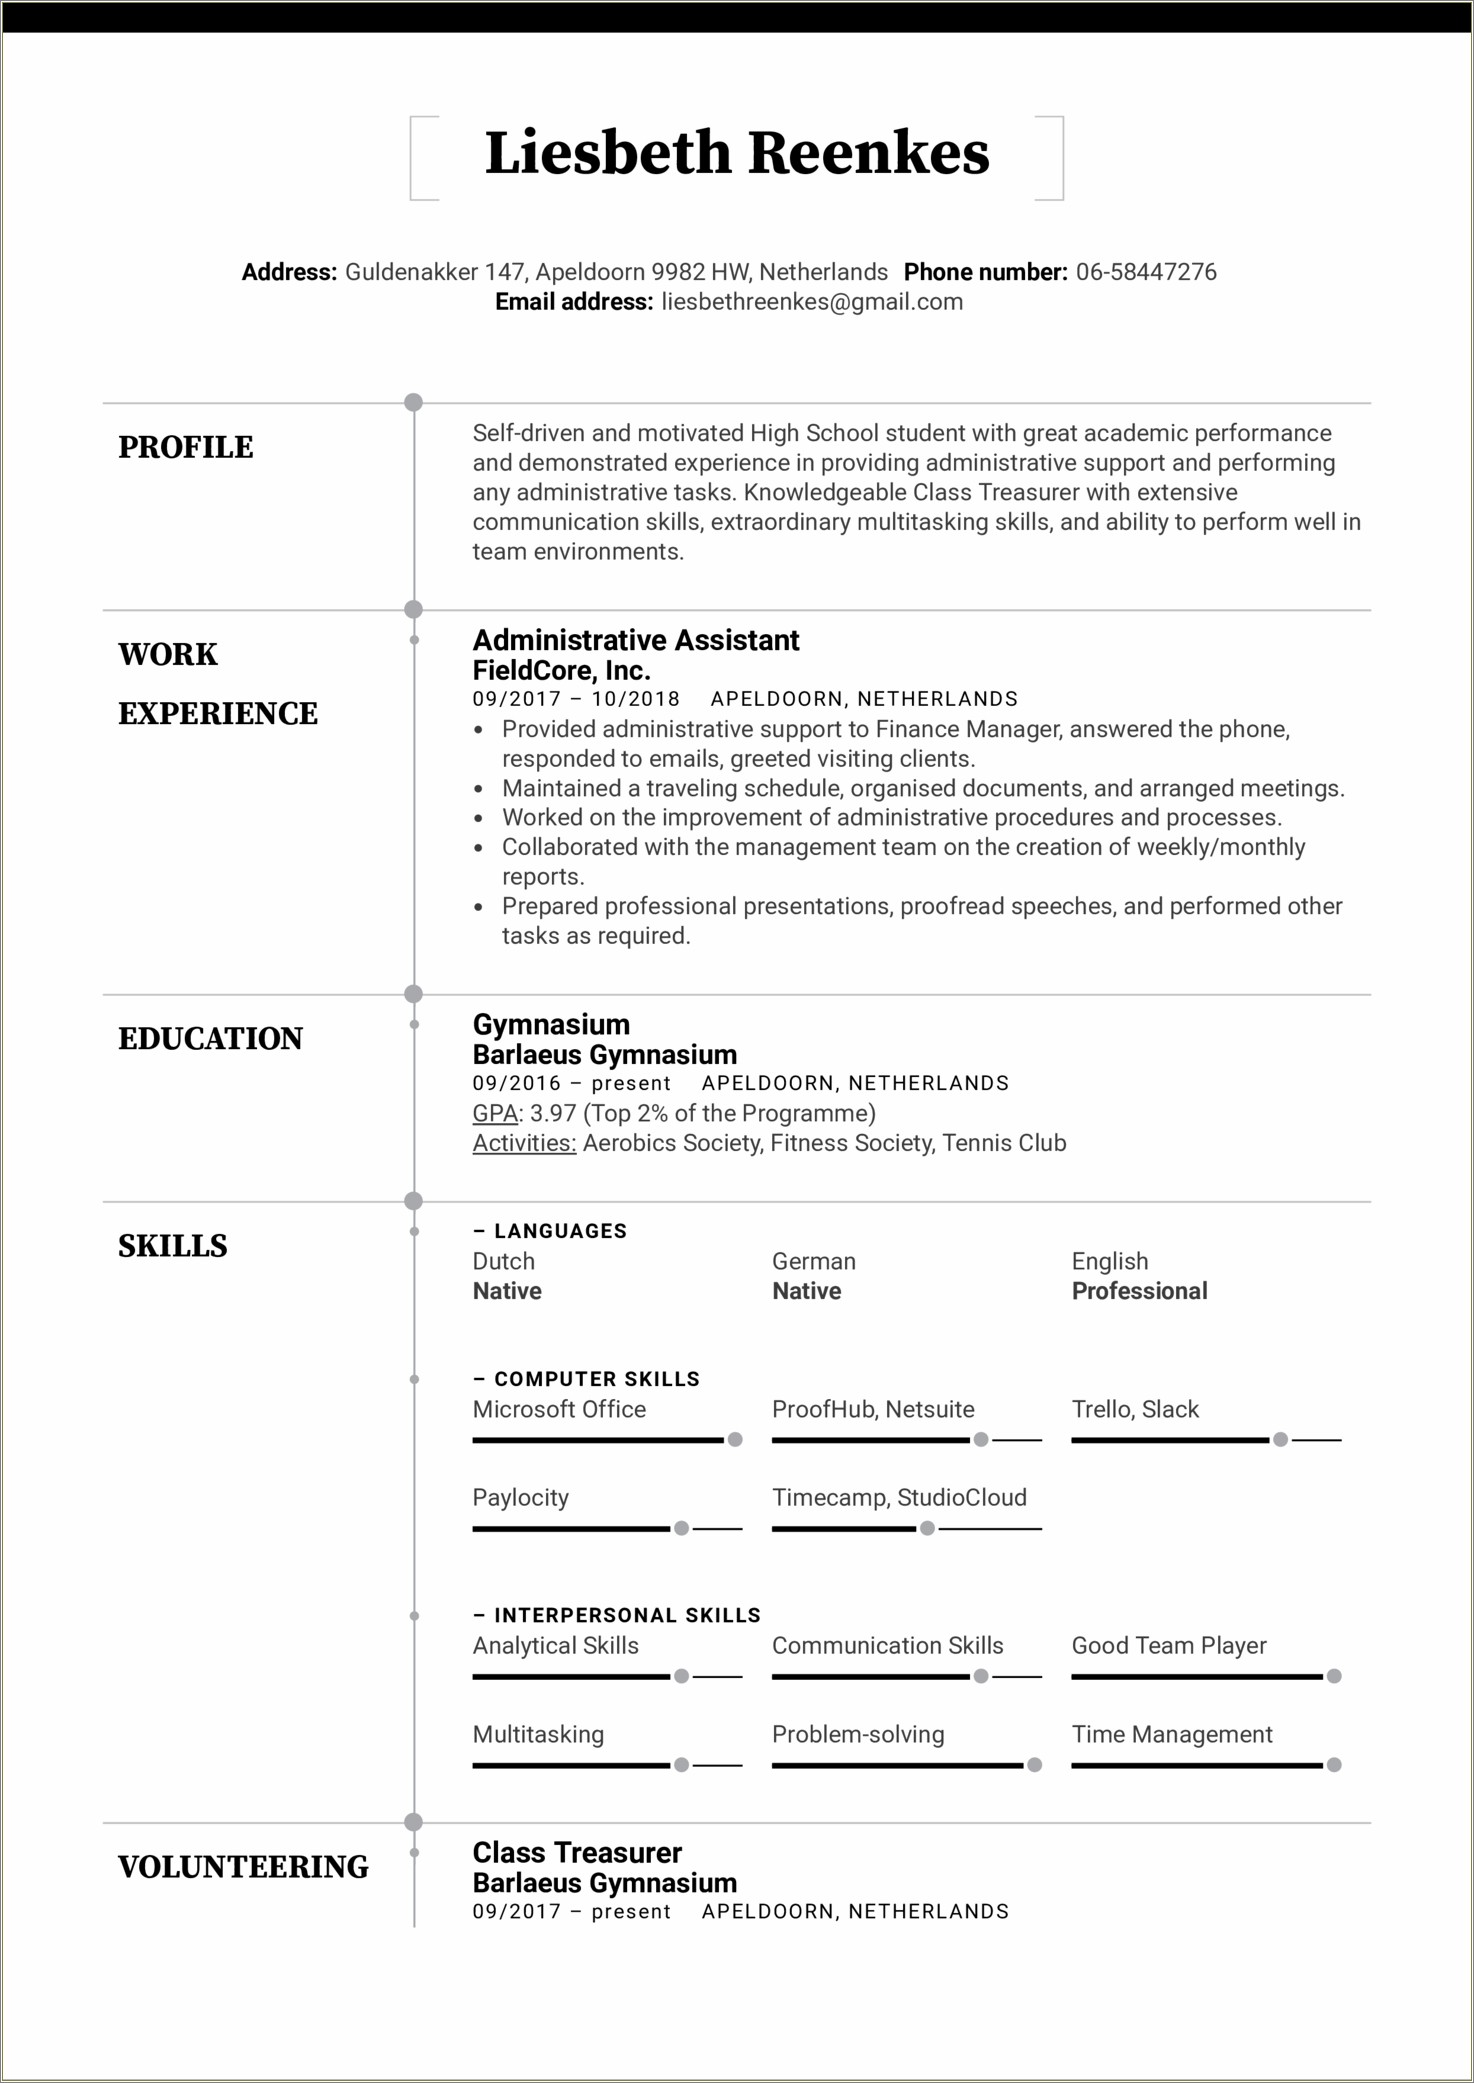 Resume Without High School Degree On It